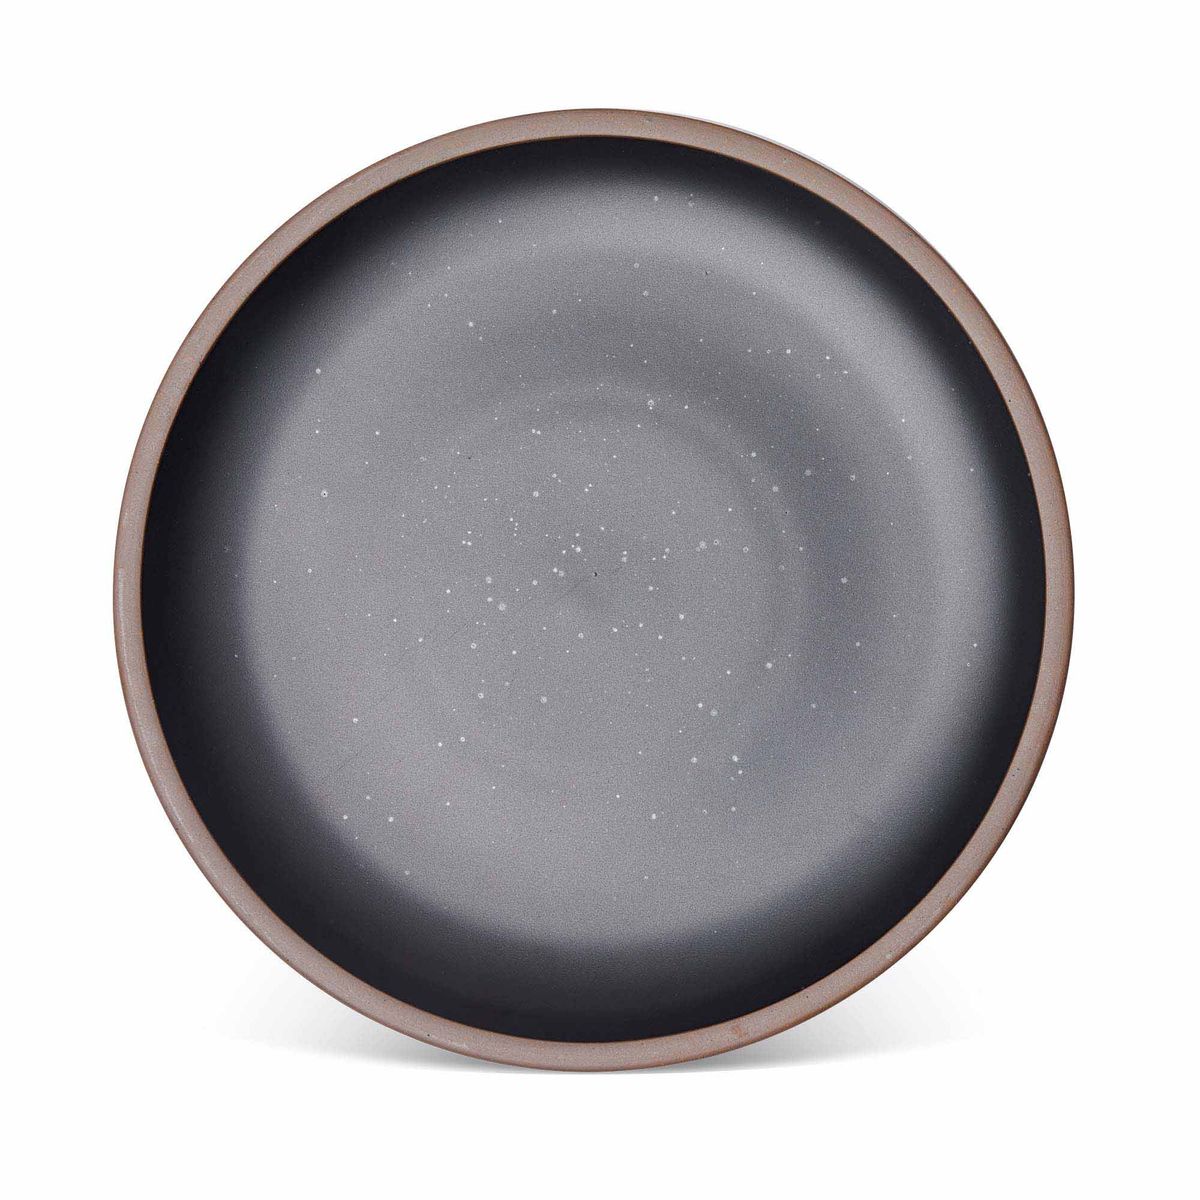 A large ceramic platter in a graphite black color featuring iron speckles and an unglazed rim.